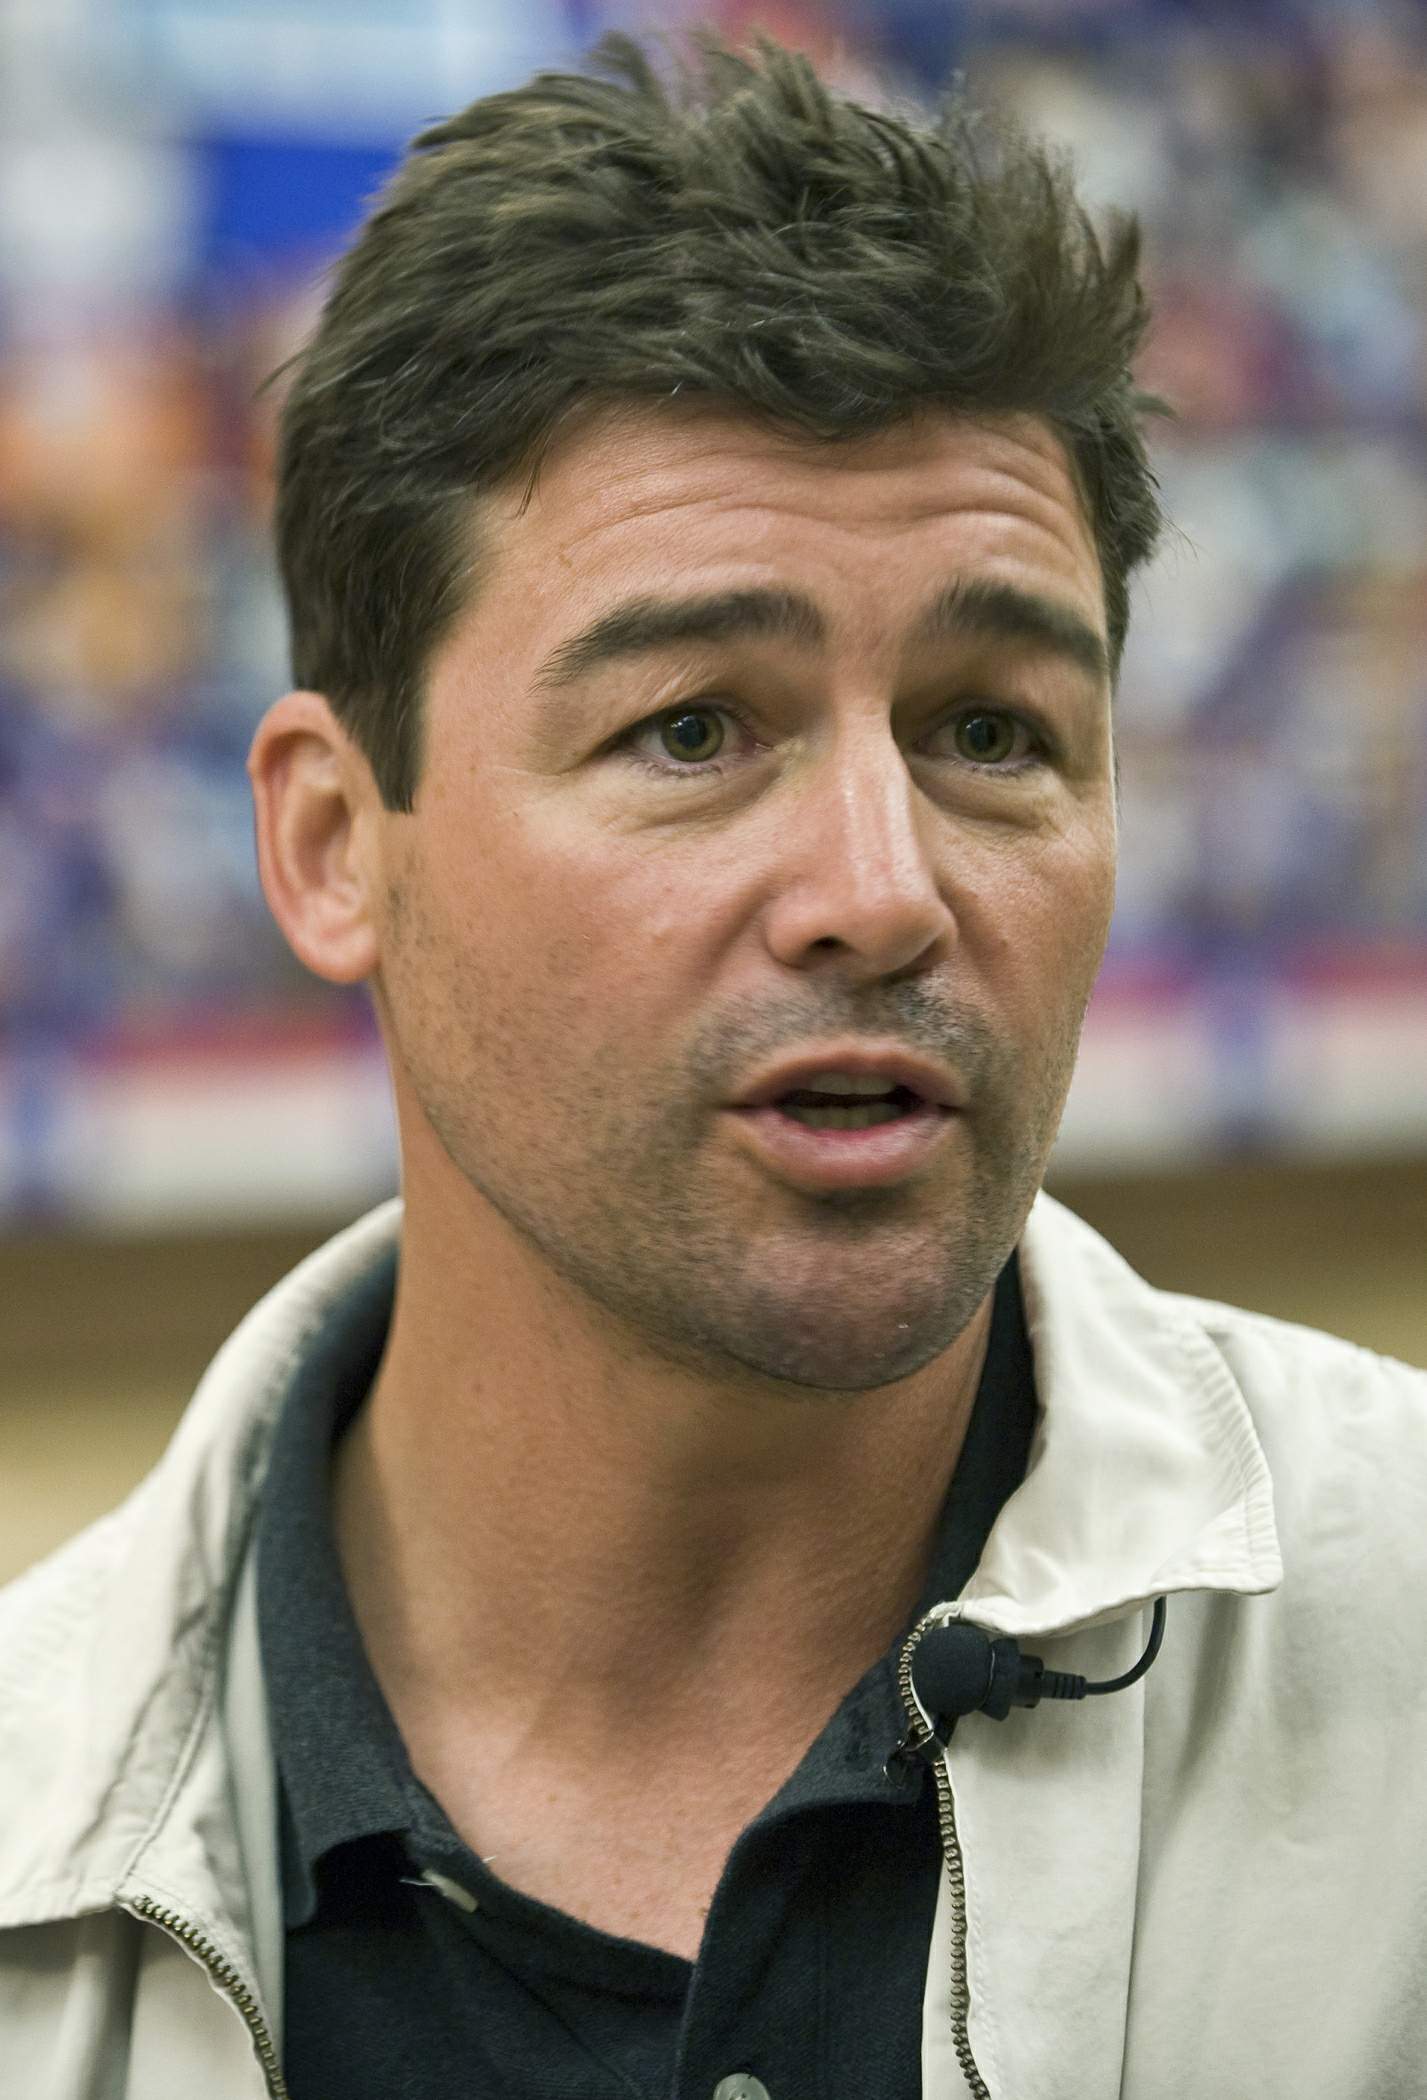 "Friday Night Lights" actor Kyle Chandler talks to U.S. servicemembers Nov. 14, 2009, at the Warrior and Family Support Center on Fort Sam Houston, Texas. (U.S. Air Force photo/Staff Sgt. Bennie Davis)